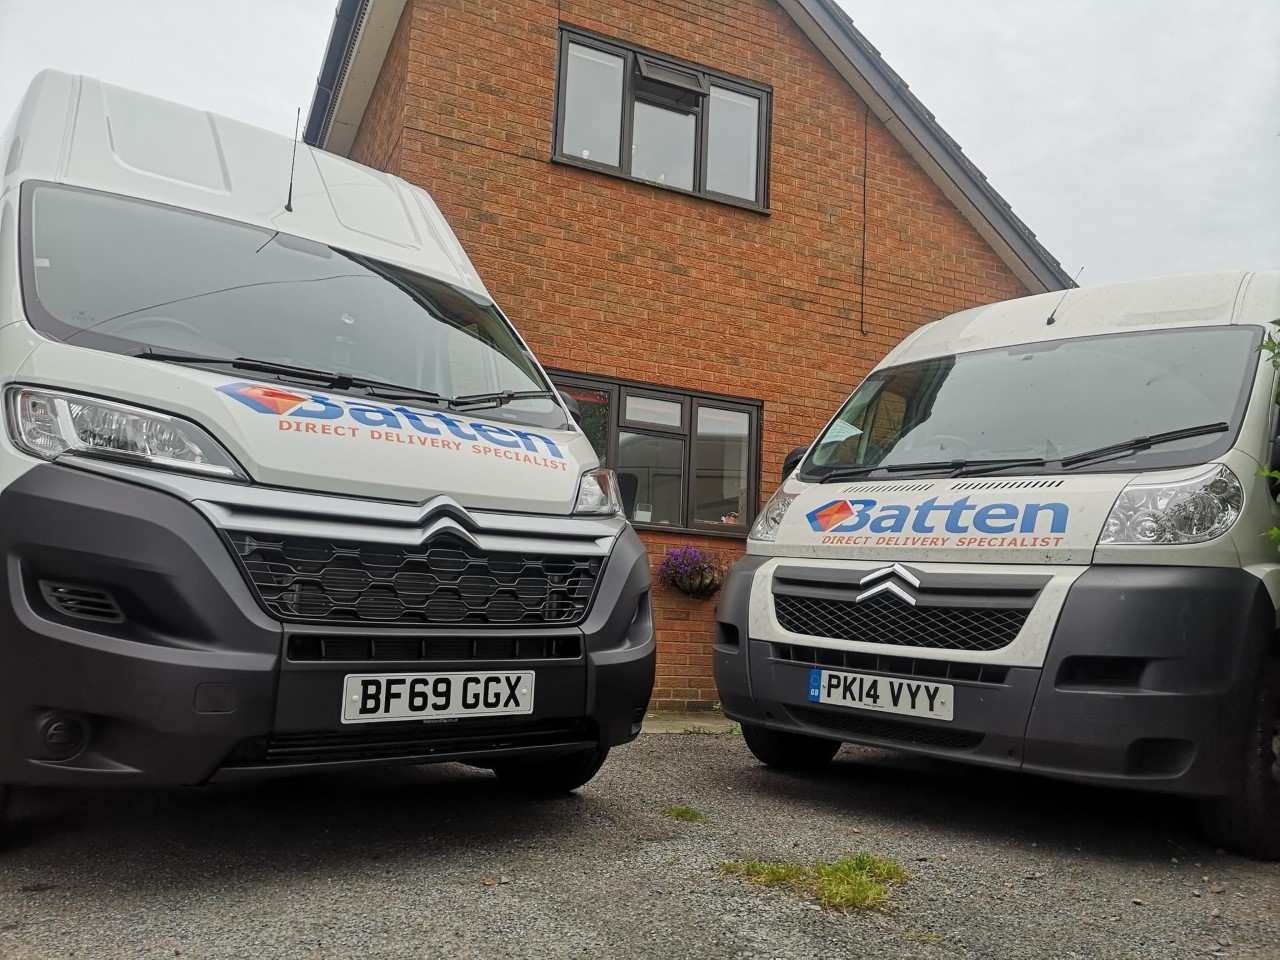 Batten Direct Delivery Specialist